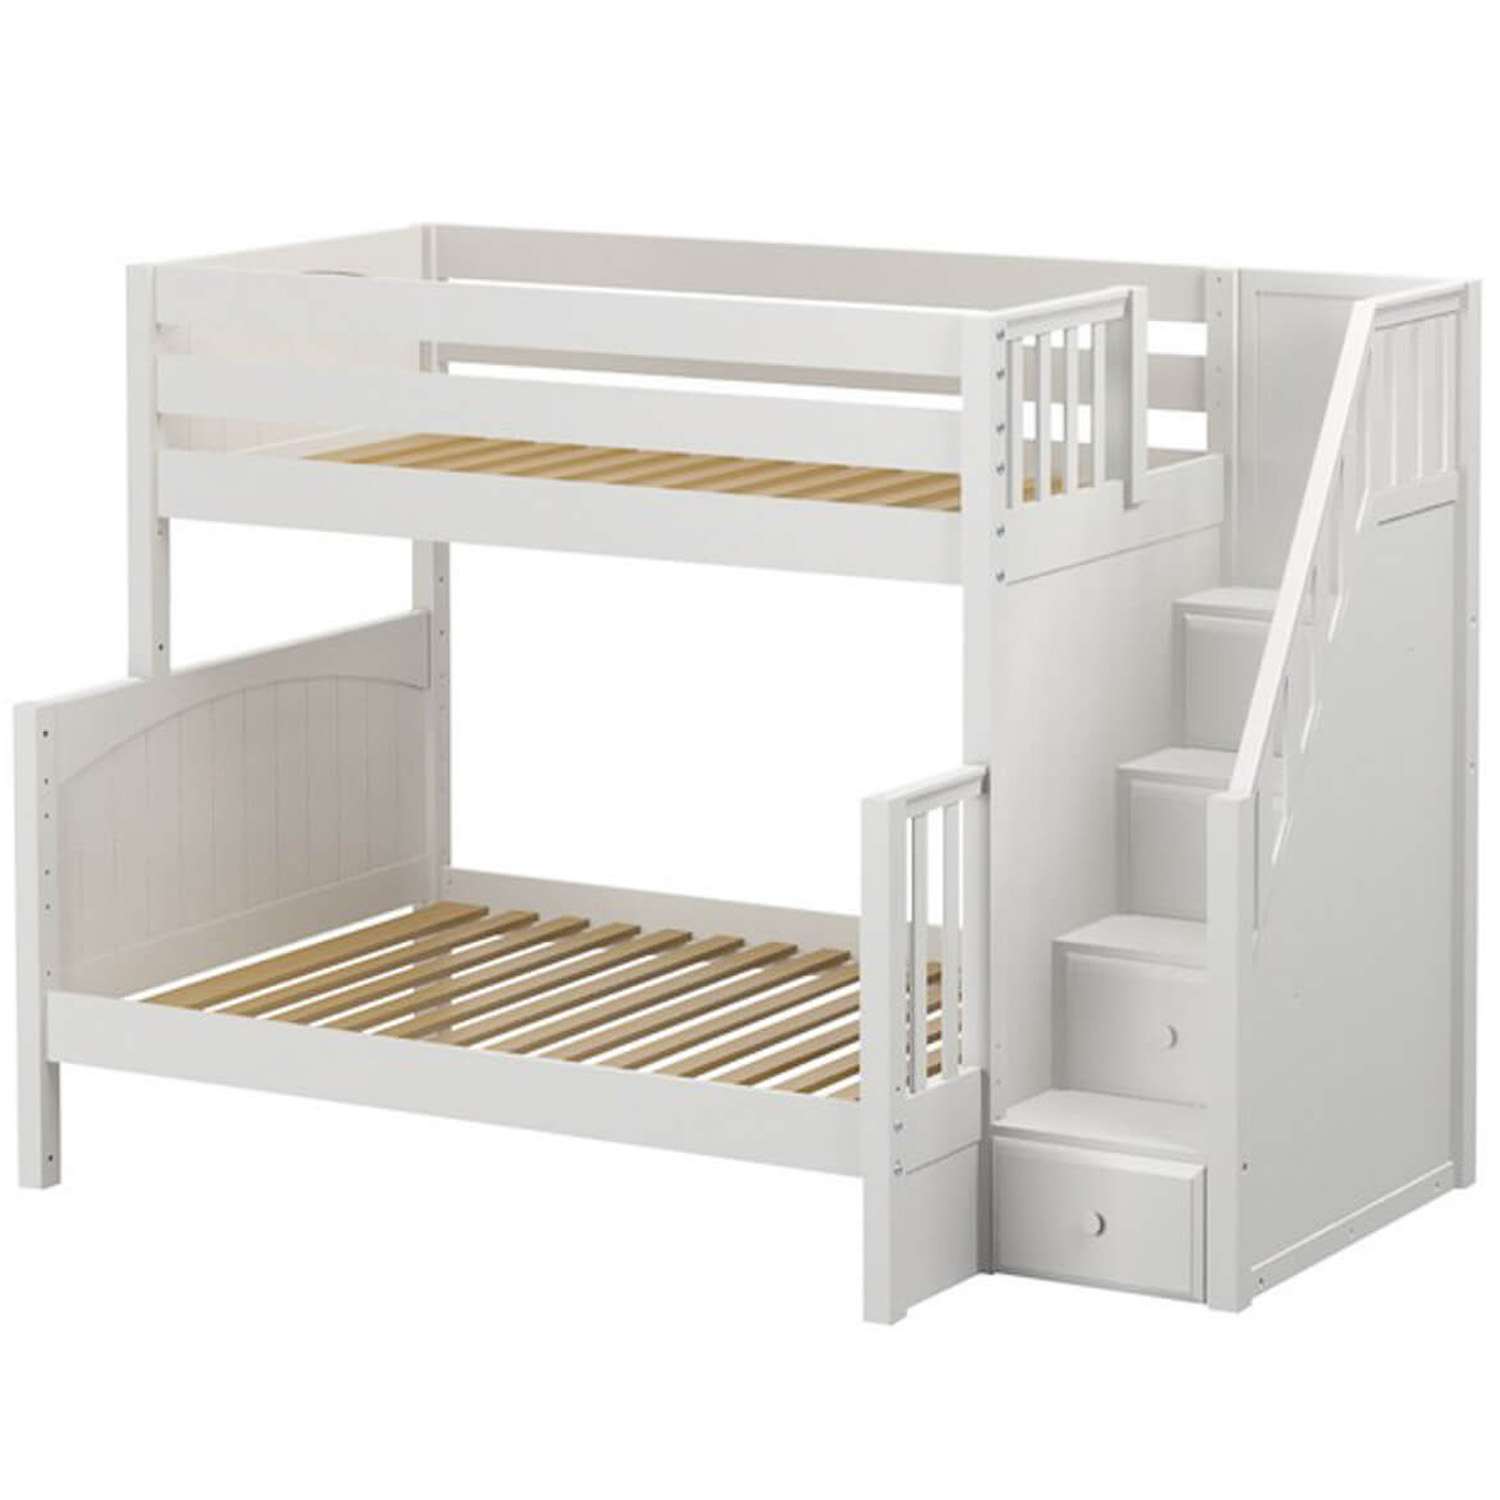 bunk beds twin over full size